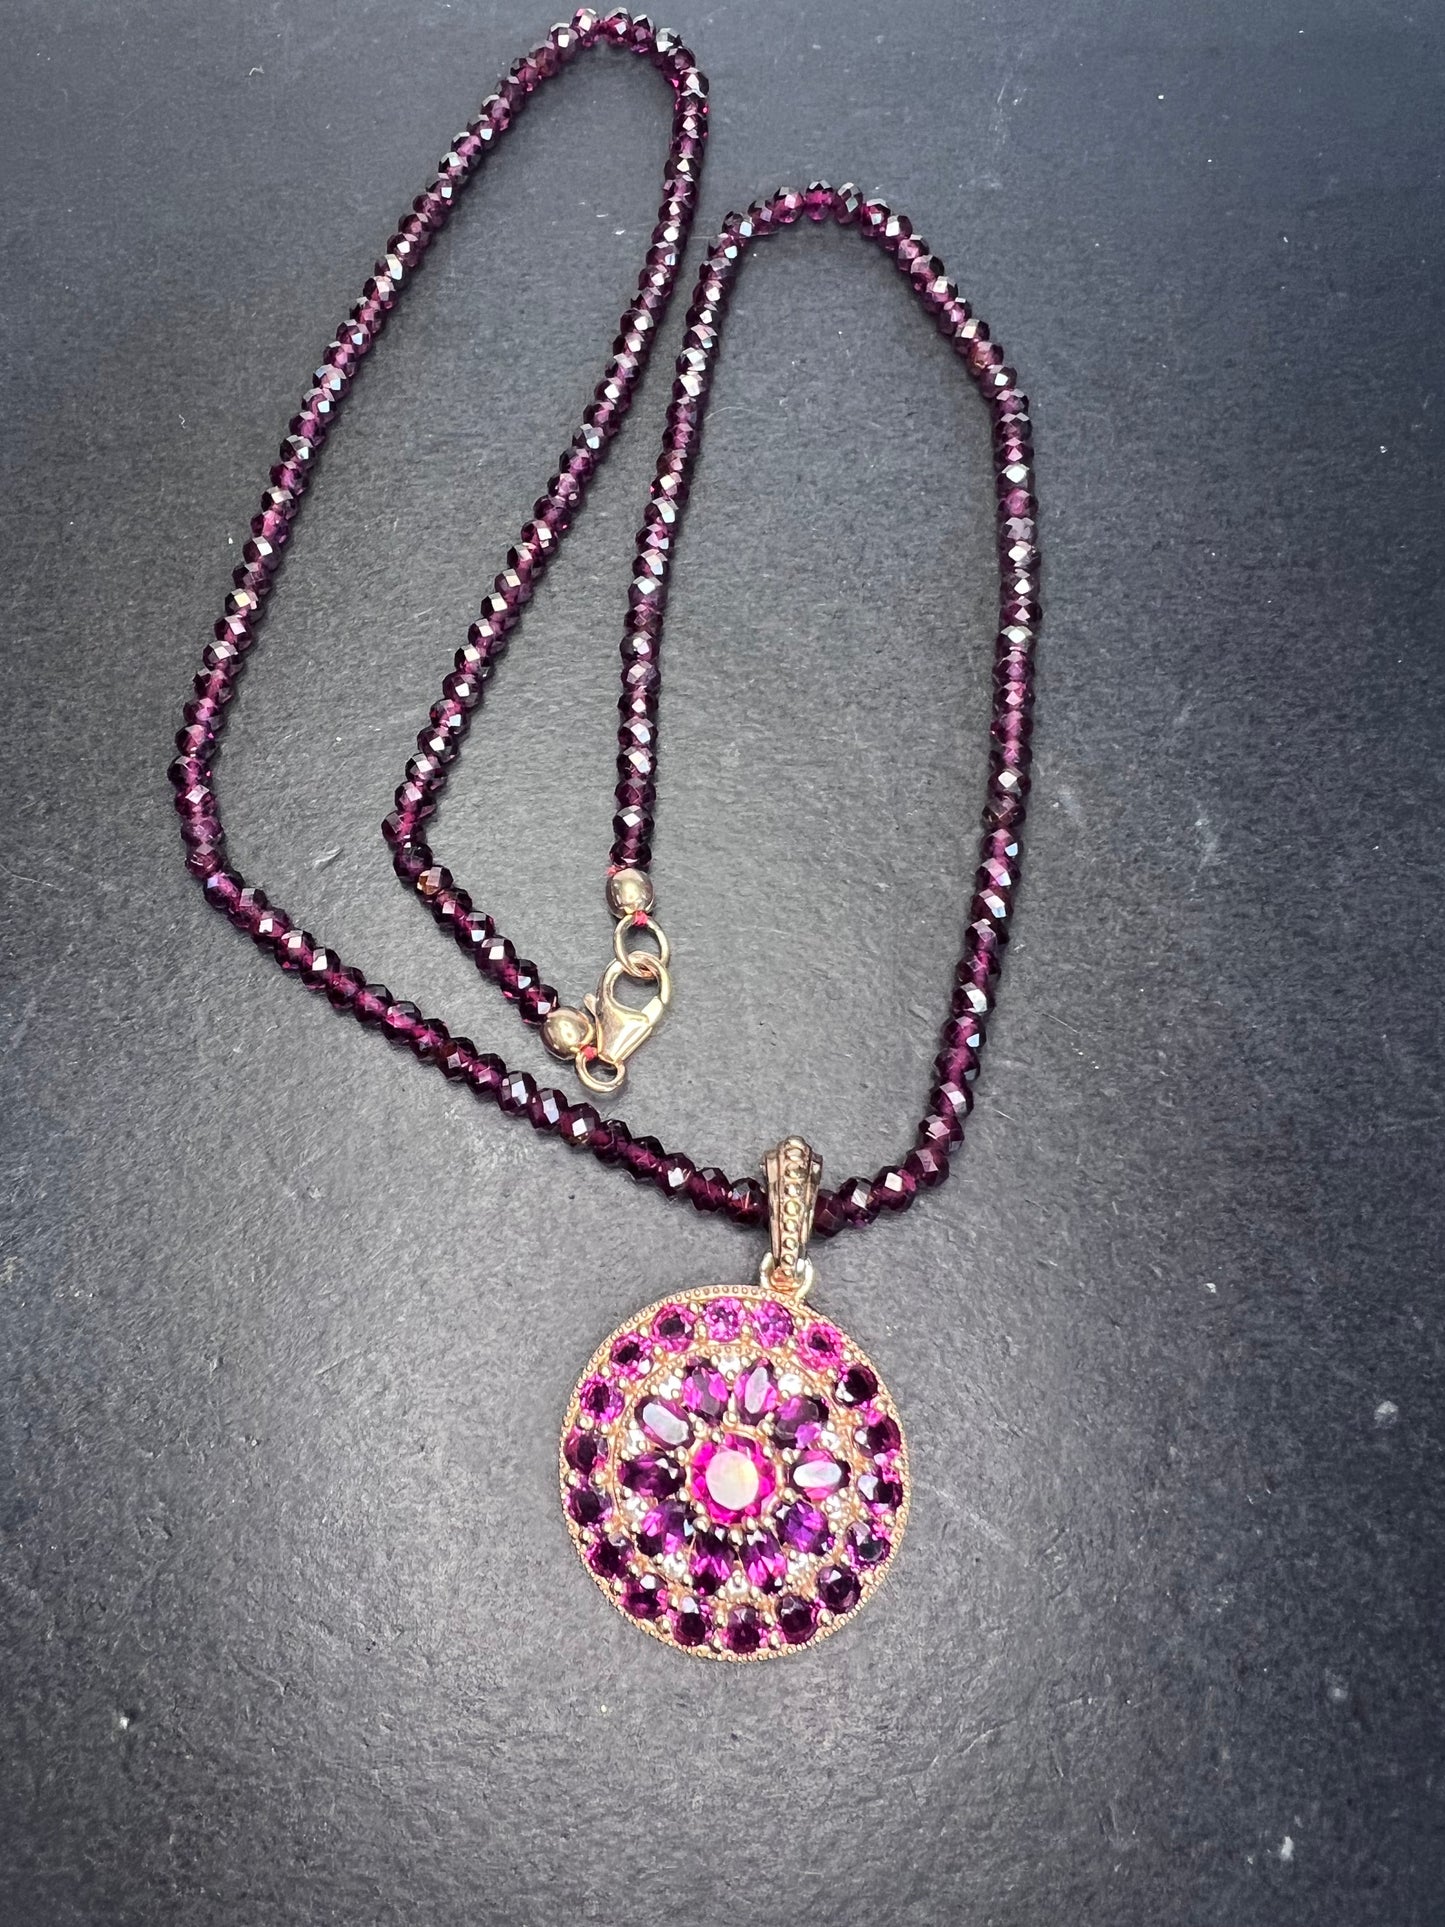 *NEW* Rhodolite garnet and white topaz pendant and necklace in rose gold over sterling silver